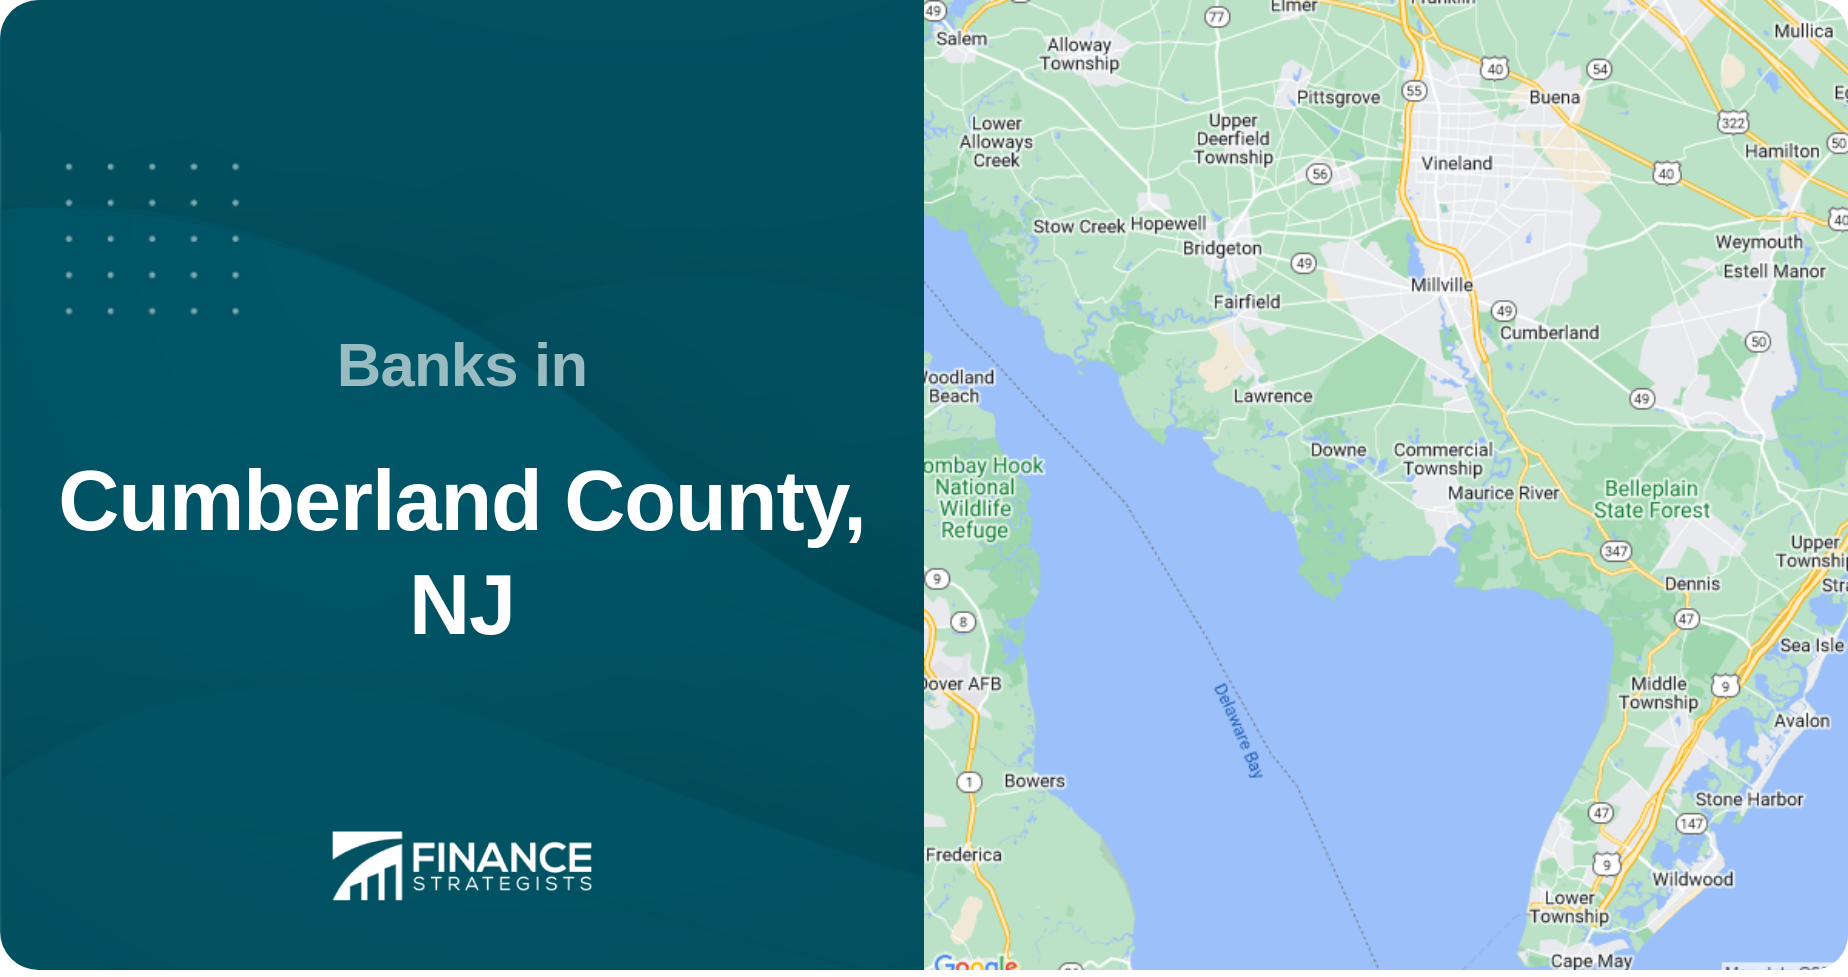 Banks in Cumberland County, NJ